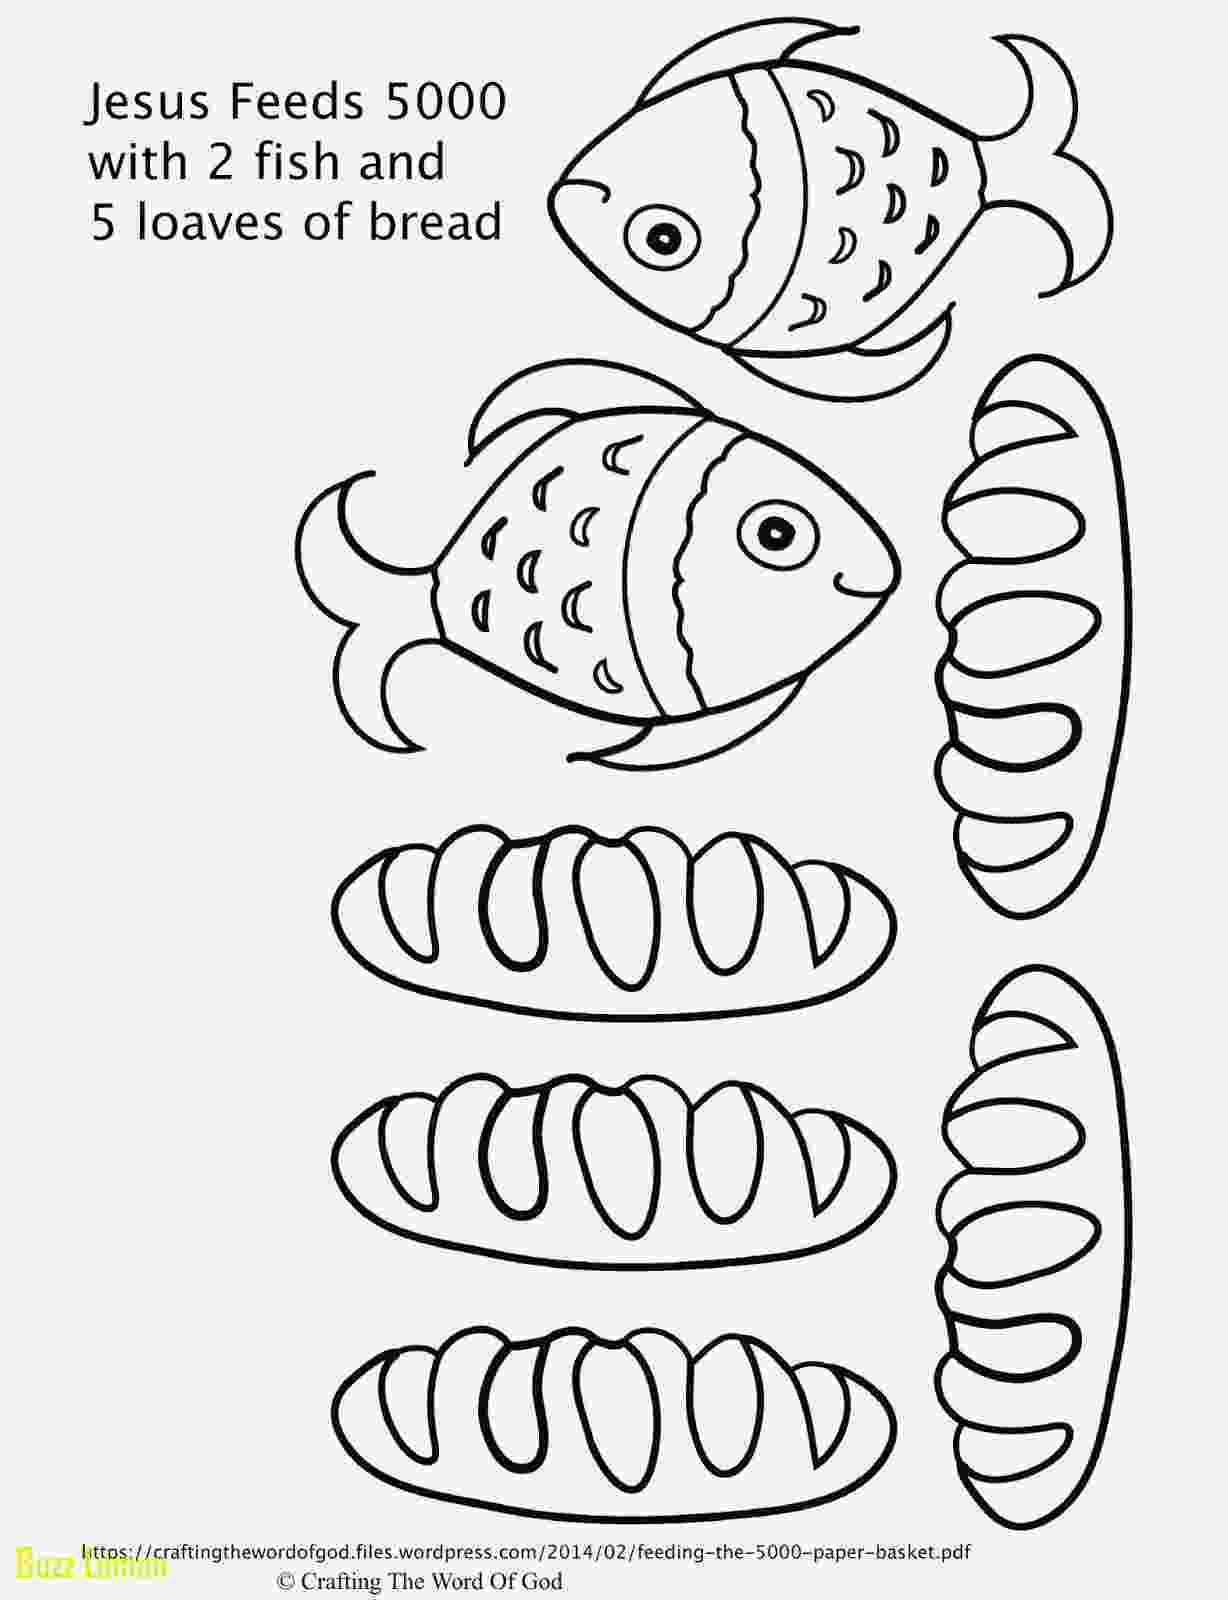 free coloring pages feeding 5000 loaves and fishes coloring page education pinterest pages 5000 feeding free coloring 